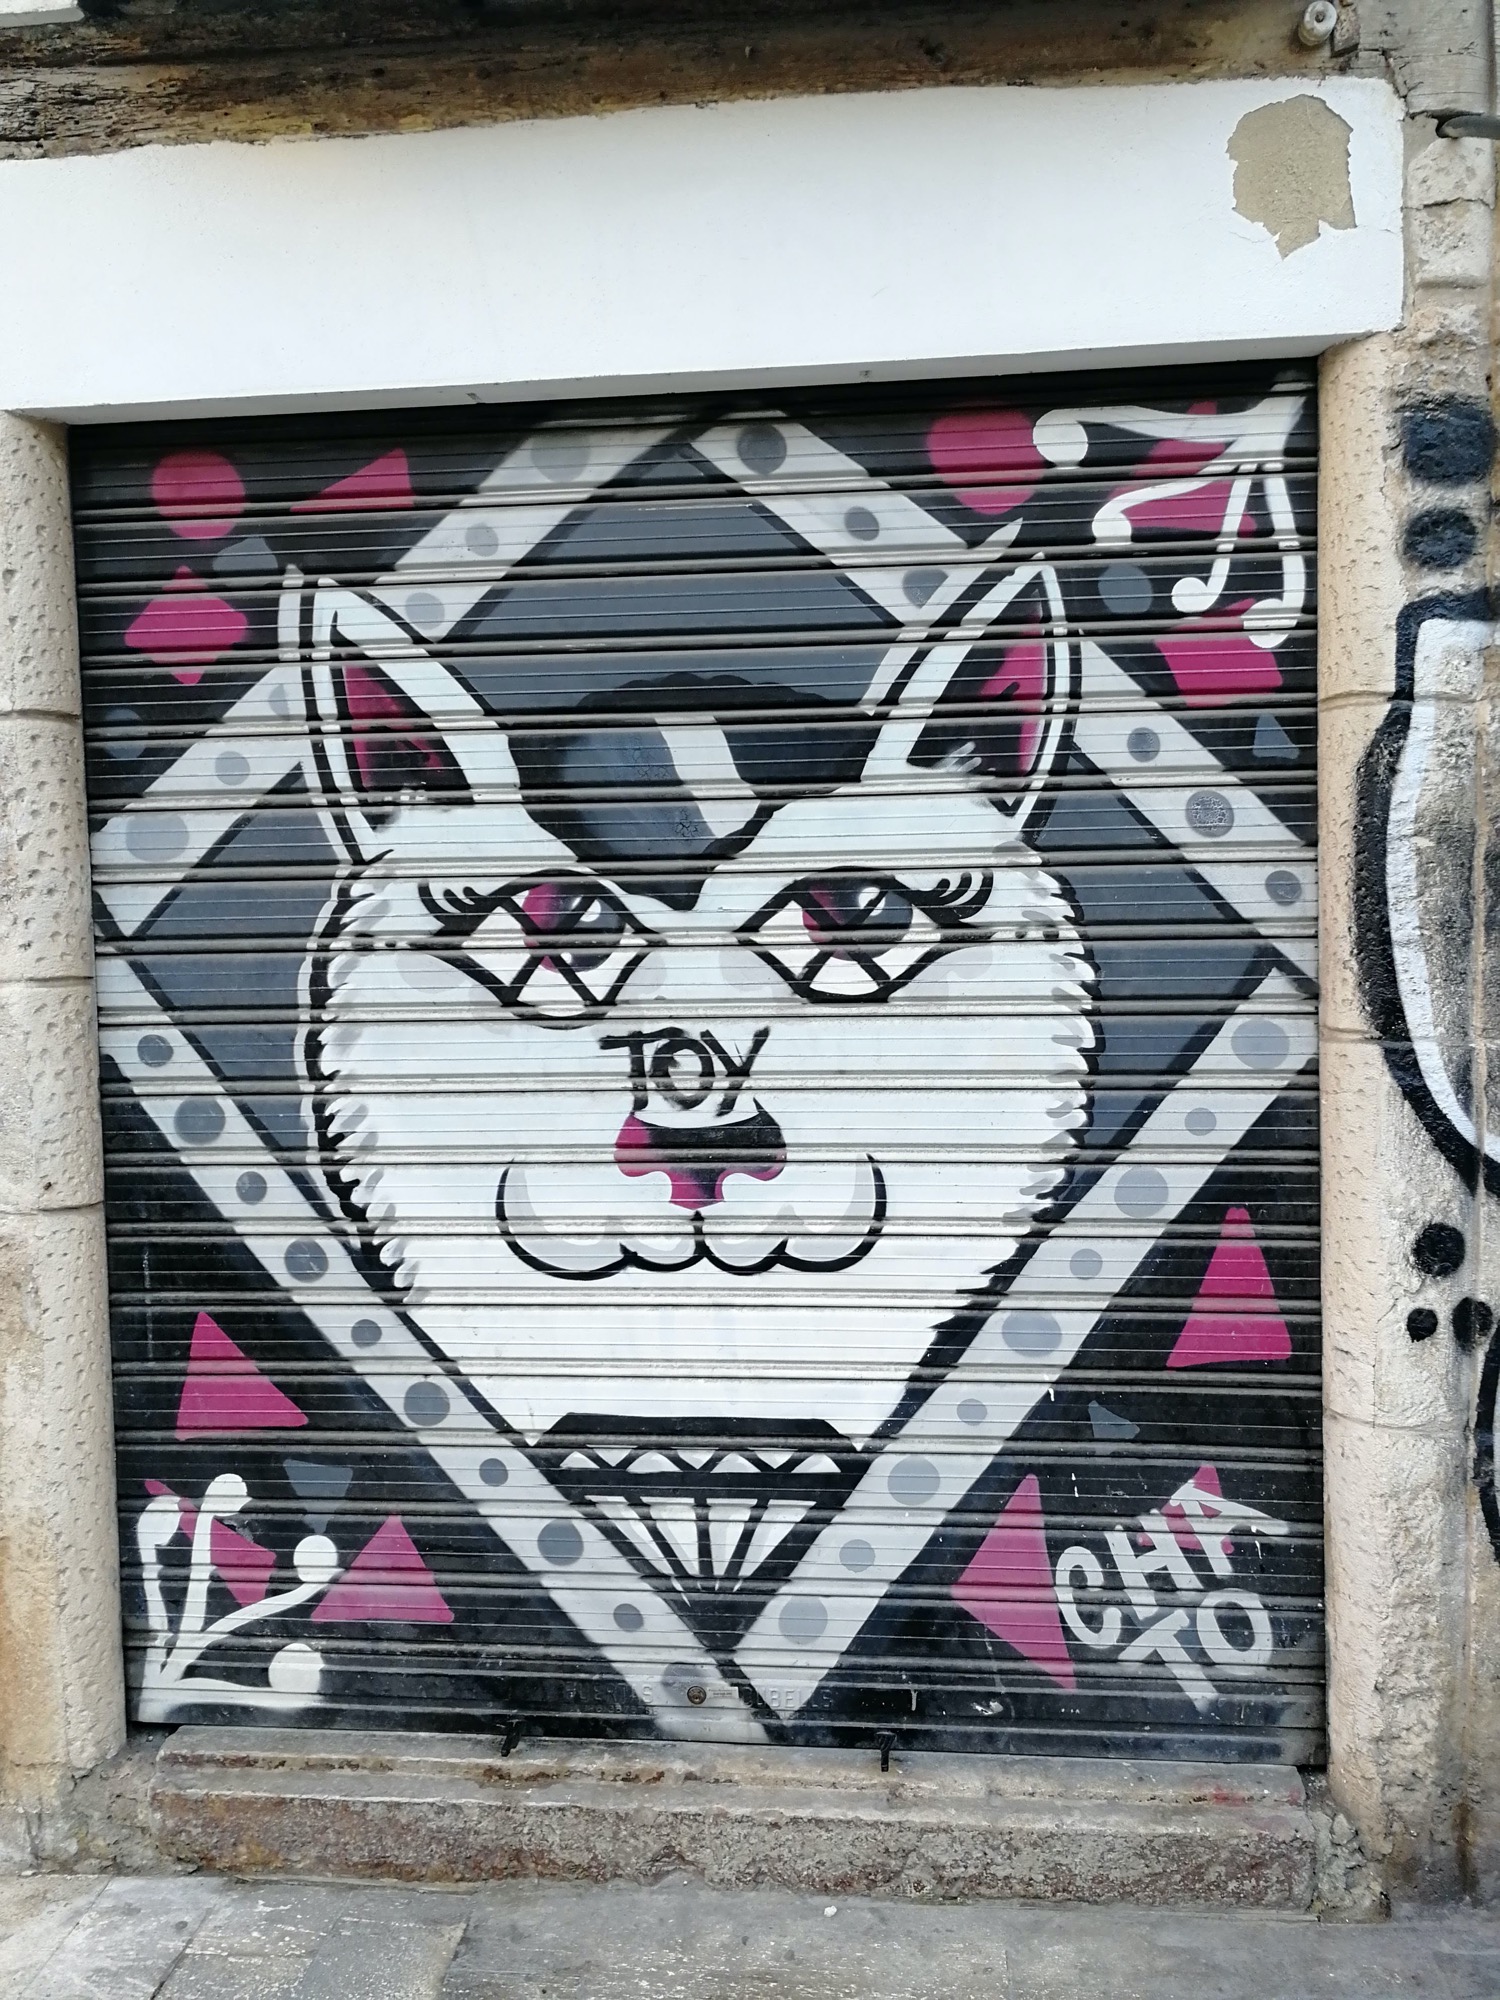 Graffiti 3375  captured by Rabot in València Spain